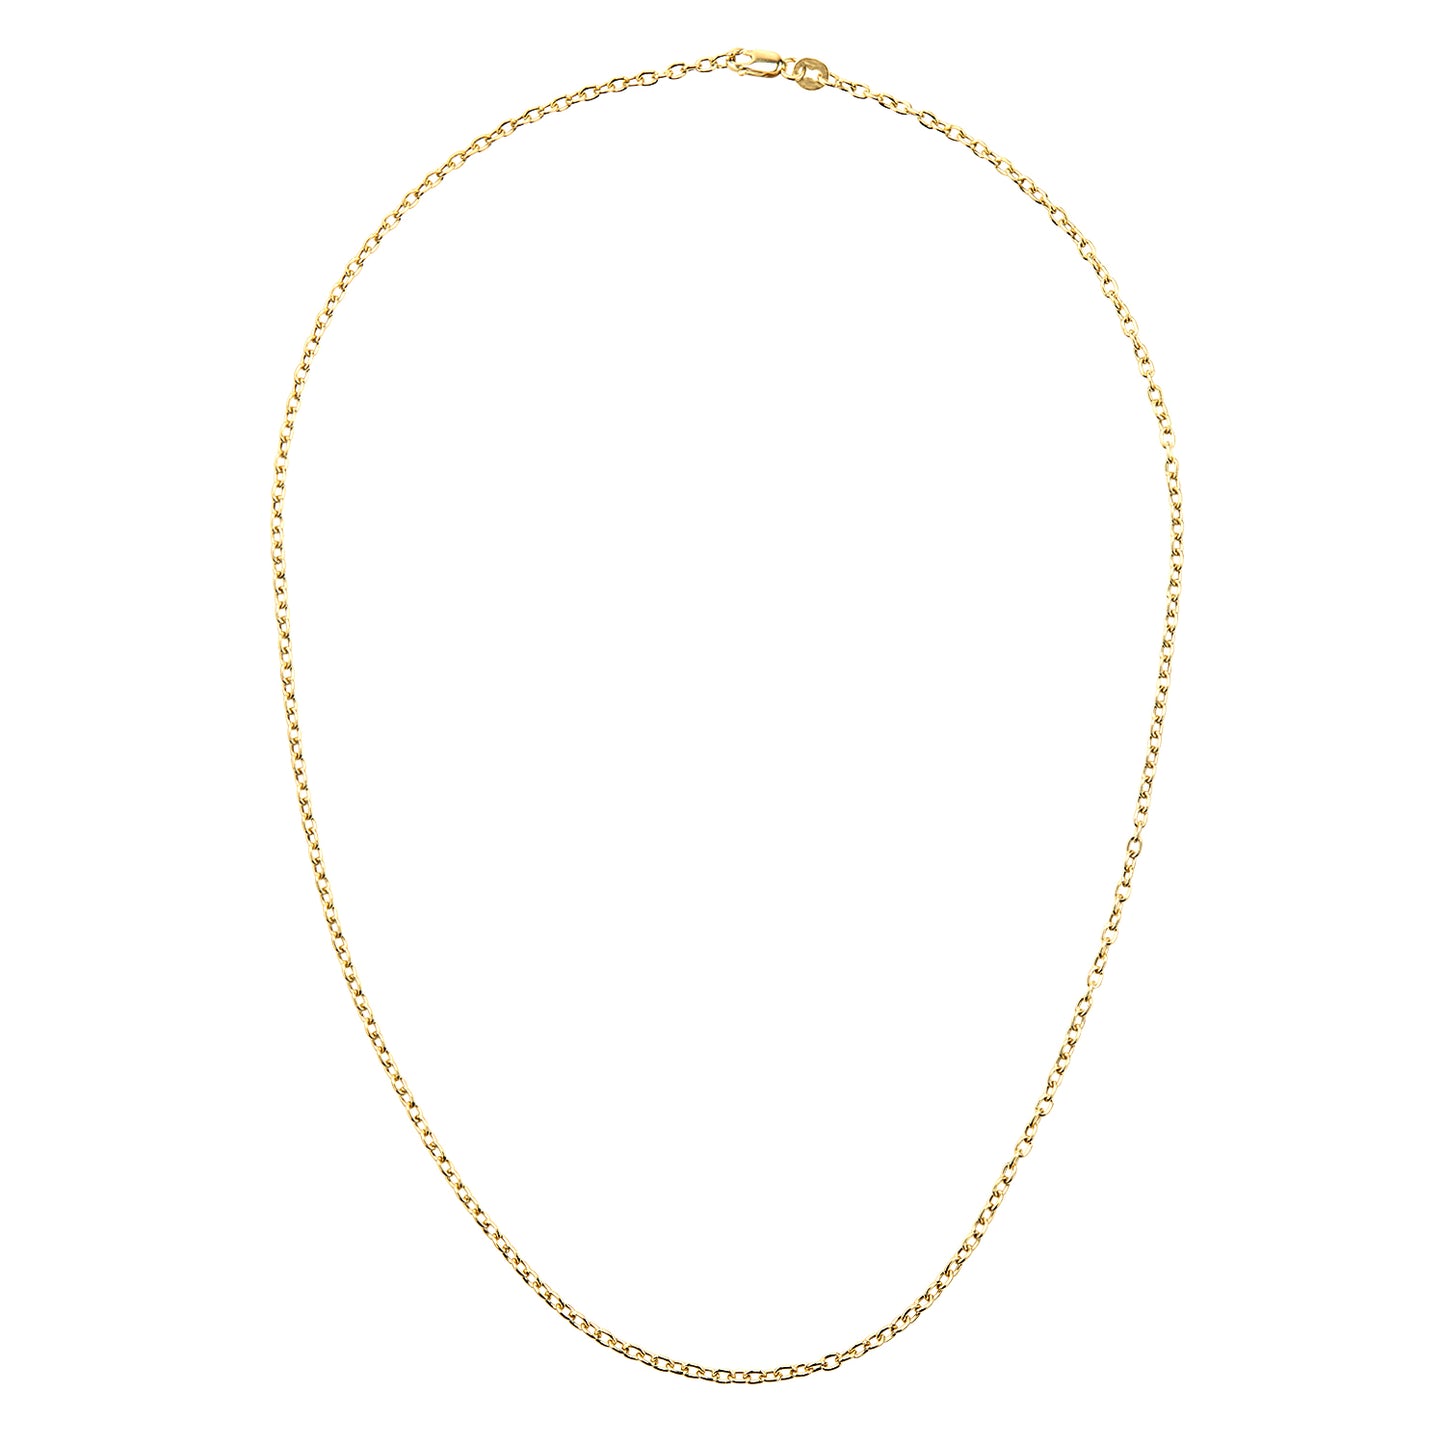 9ct Gold  Cable Chain Necklace 2mm 18 inch - 060AXLBRVY-18